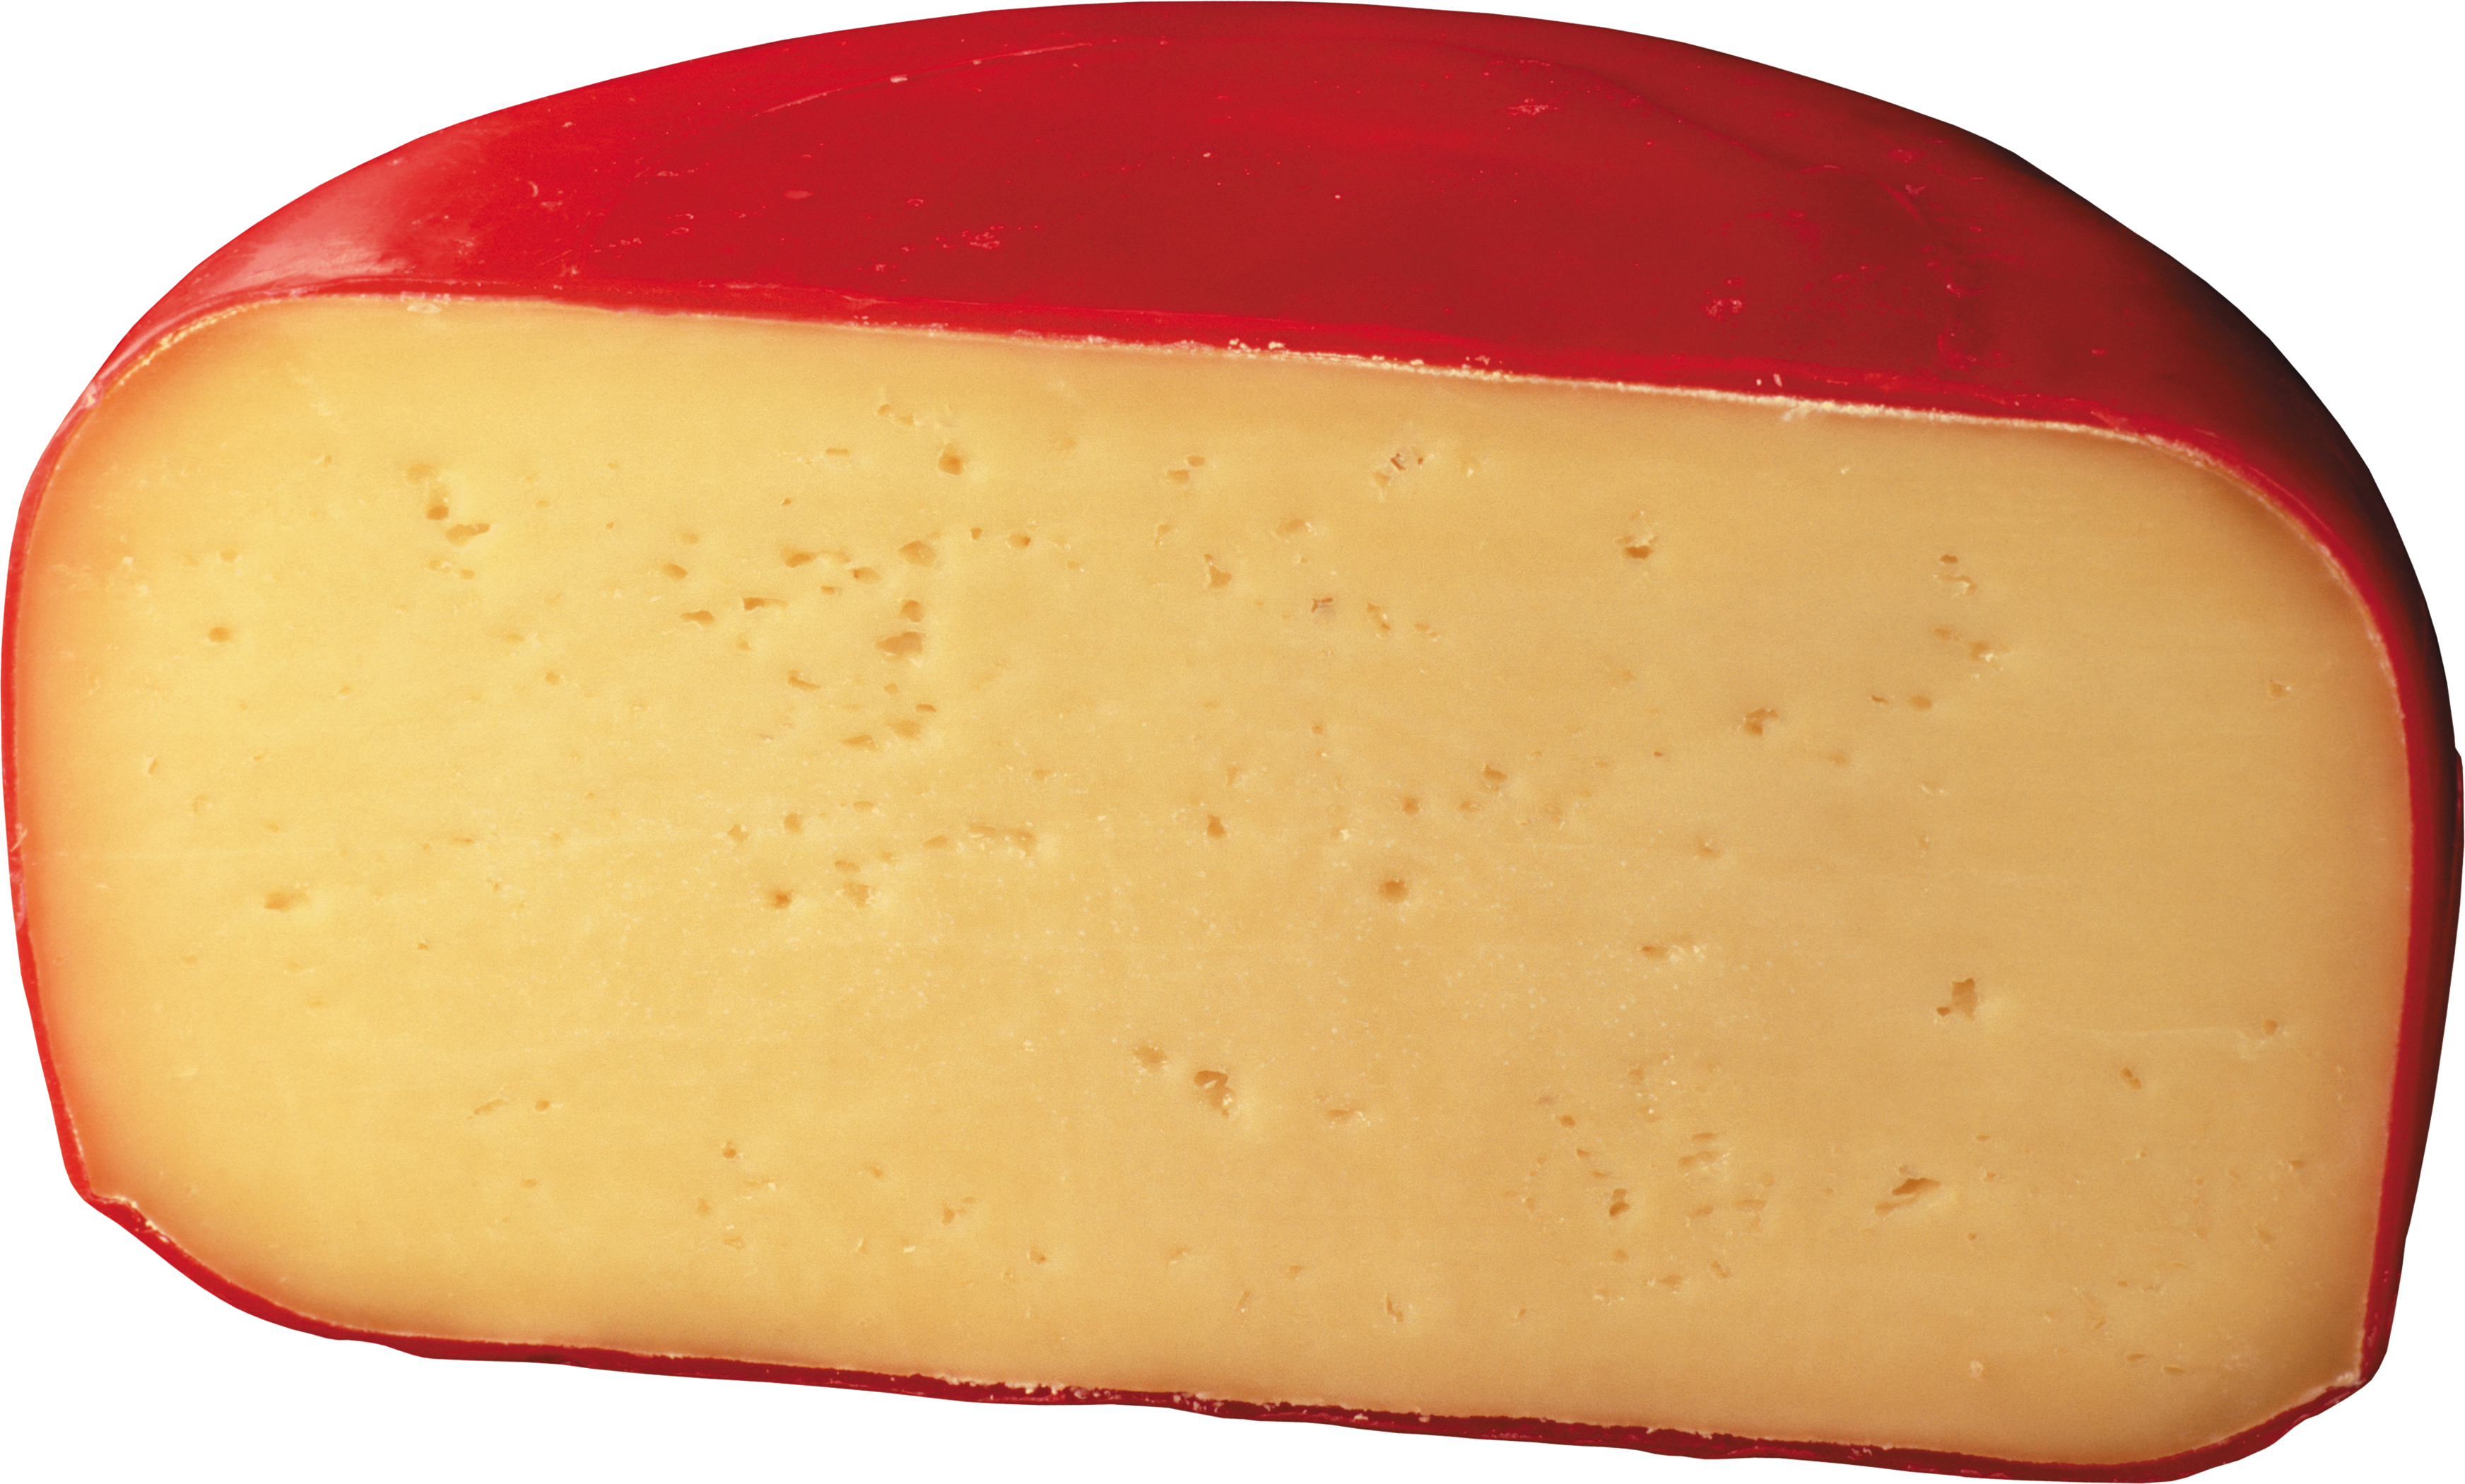 Cheese Png Image Transparent Image Download Size 3488x2100px